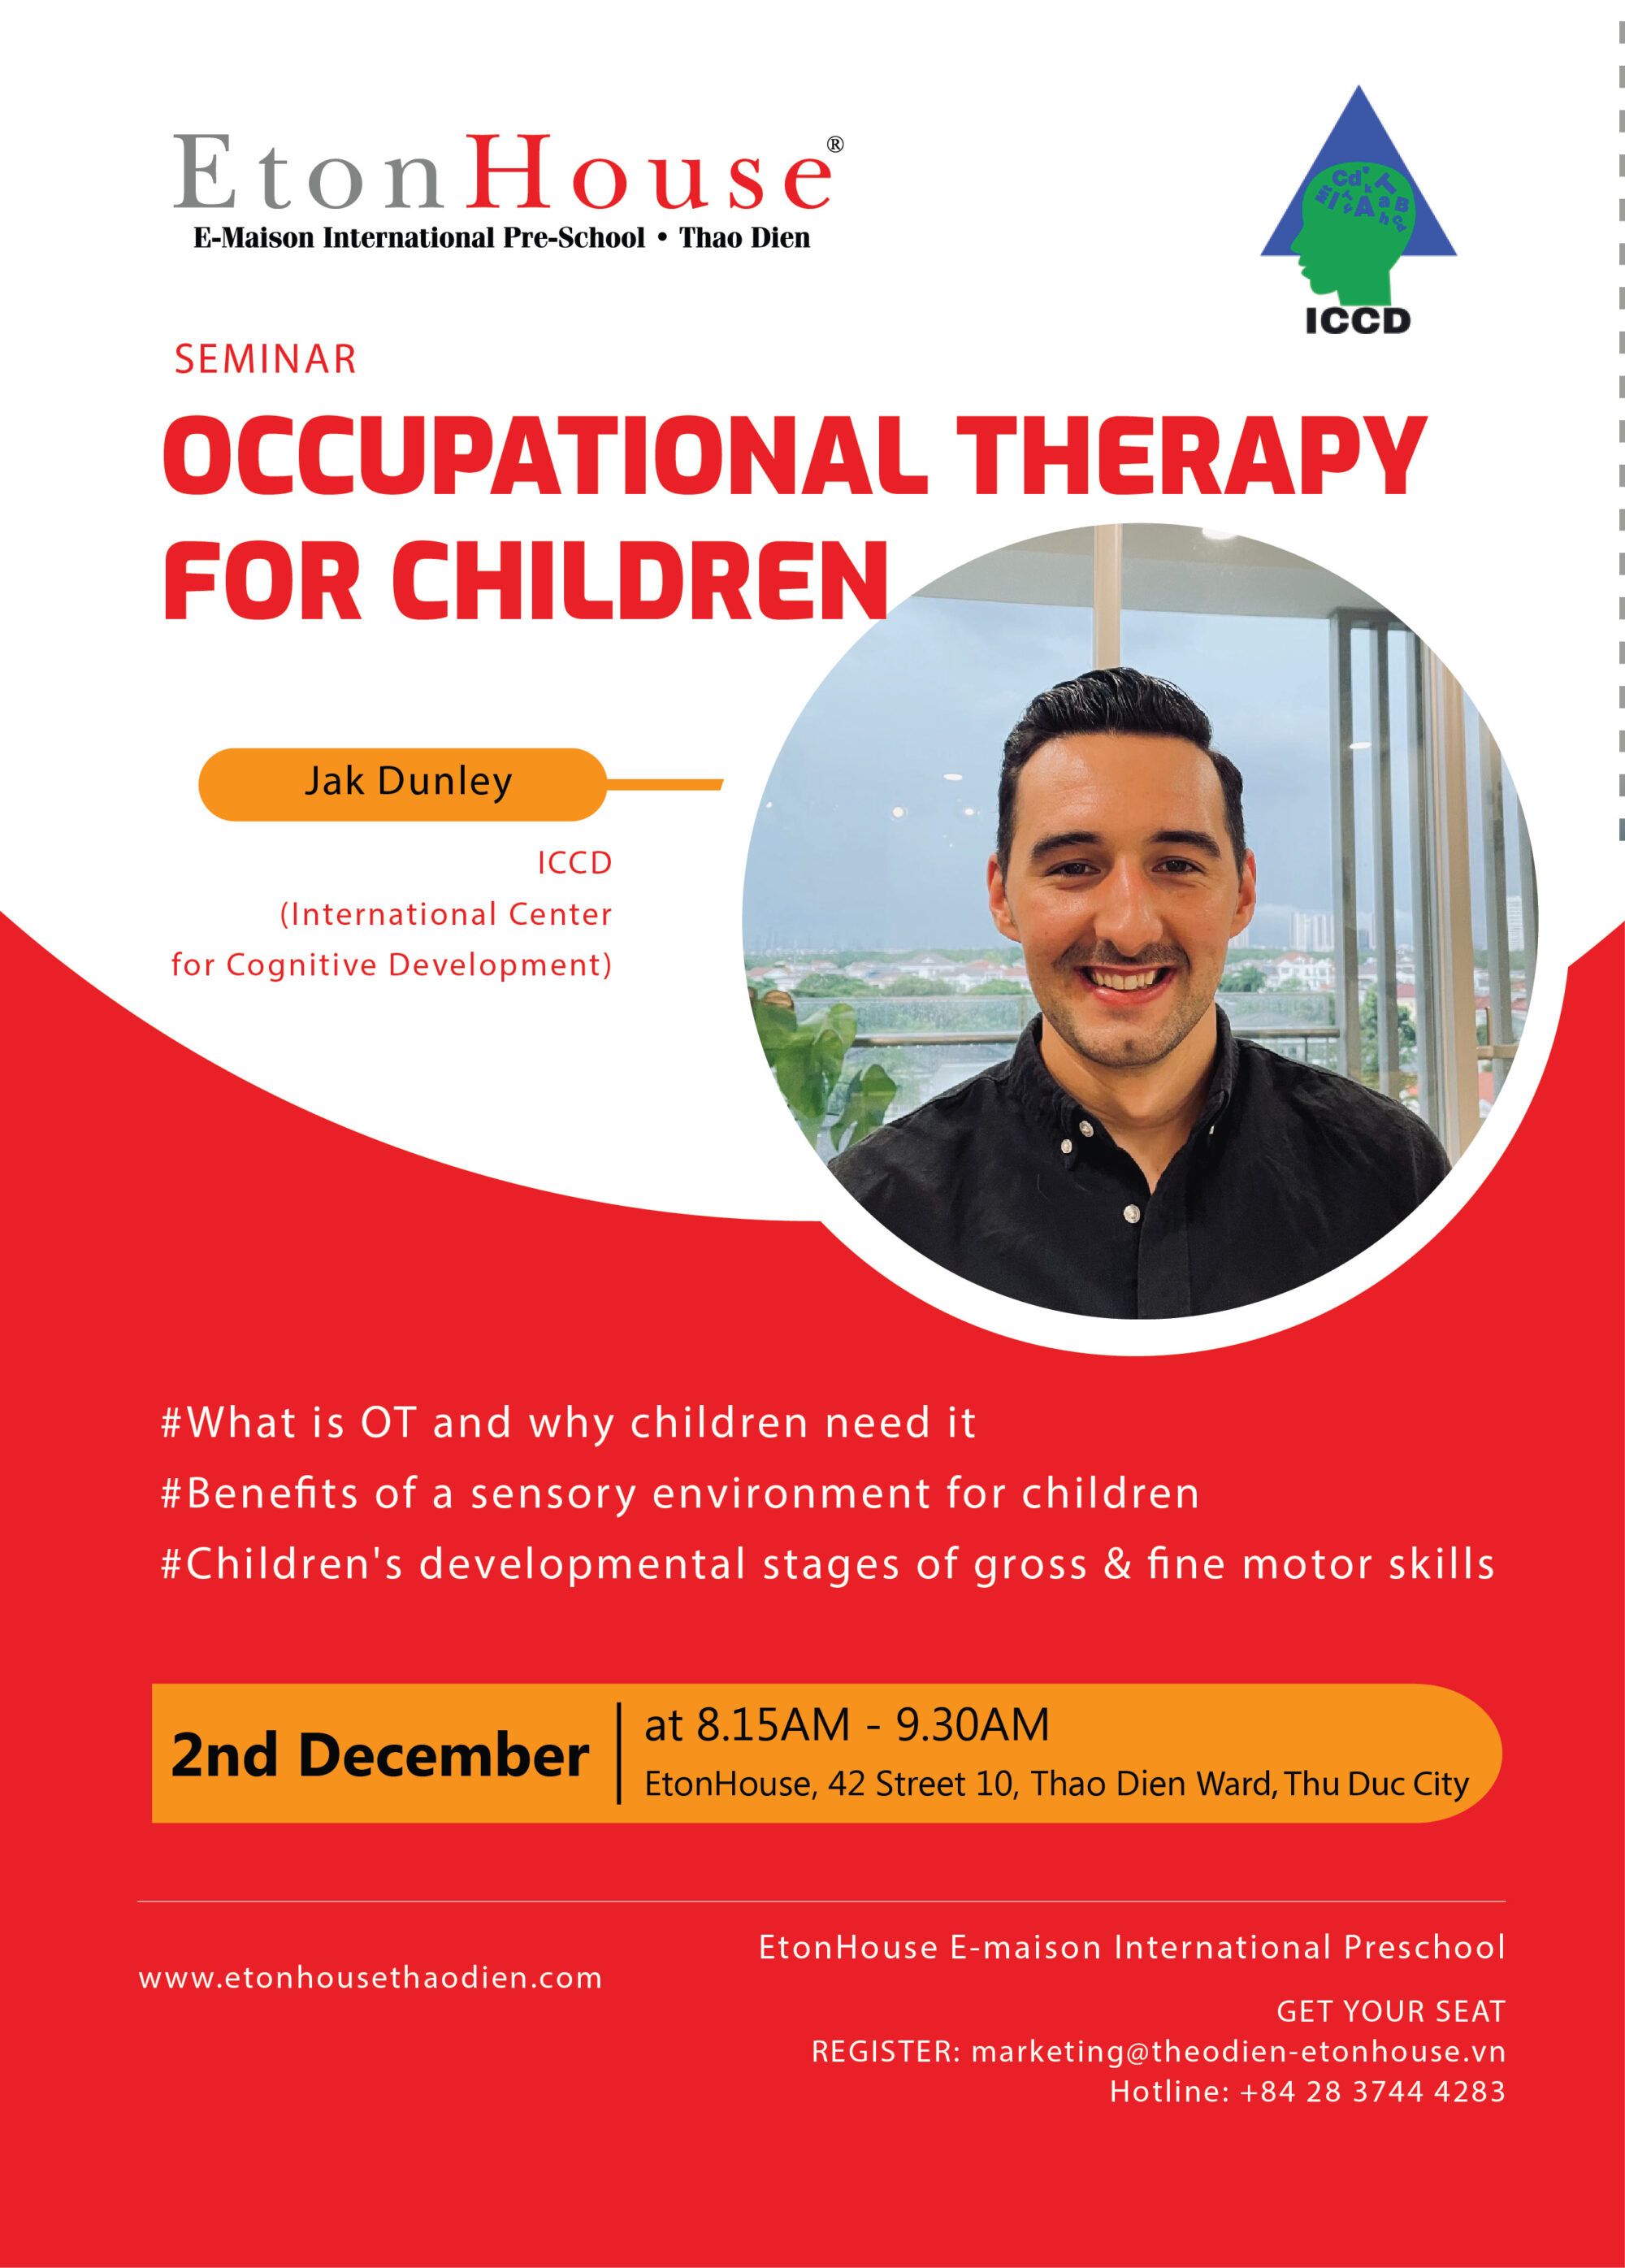 EtonHouse Seminar: Occupational Therapy for Children